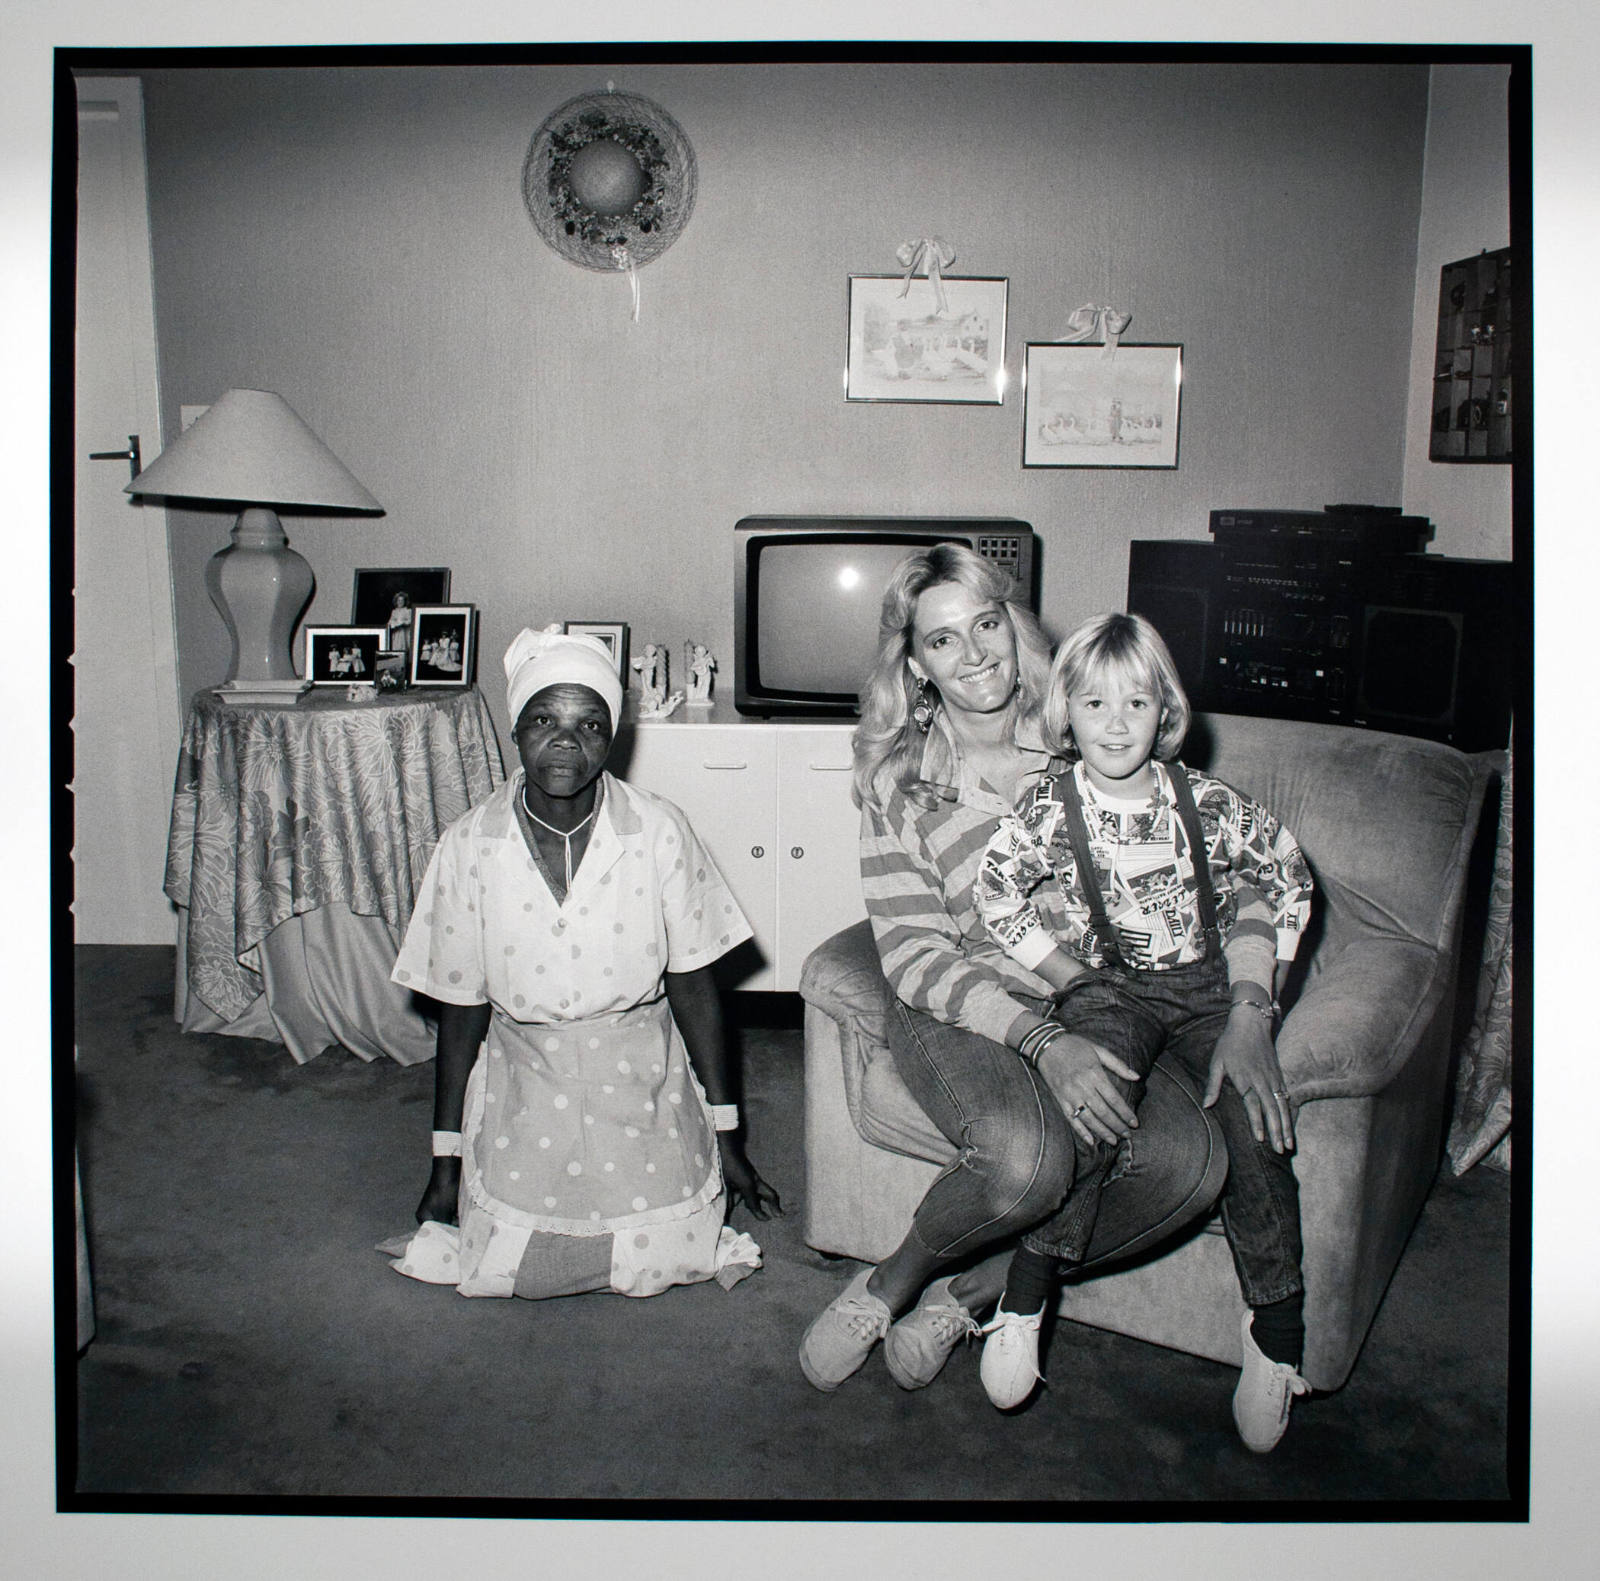 Mother, Daughter, Maid. Johannesburg, South Africa. 1988-90